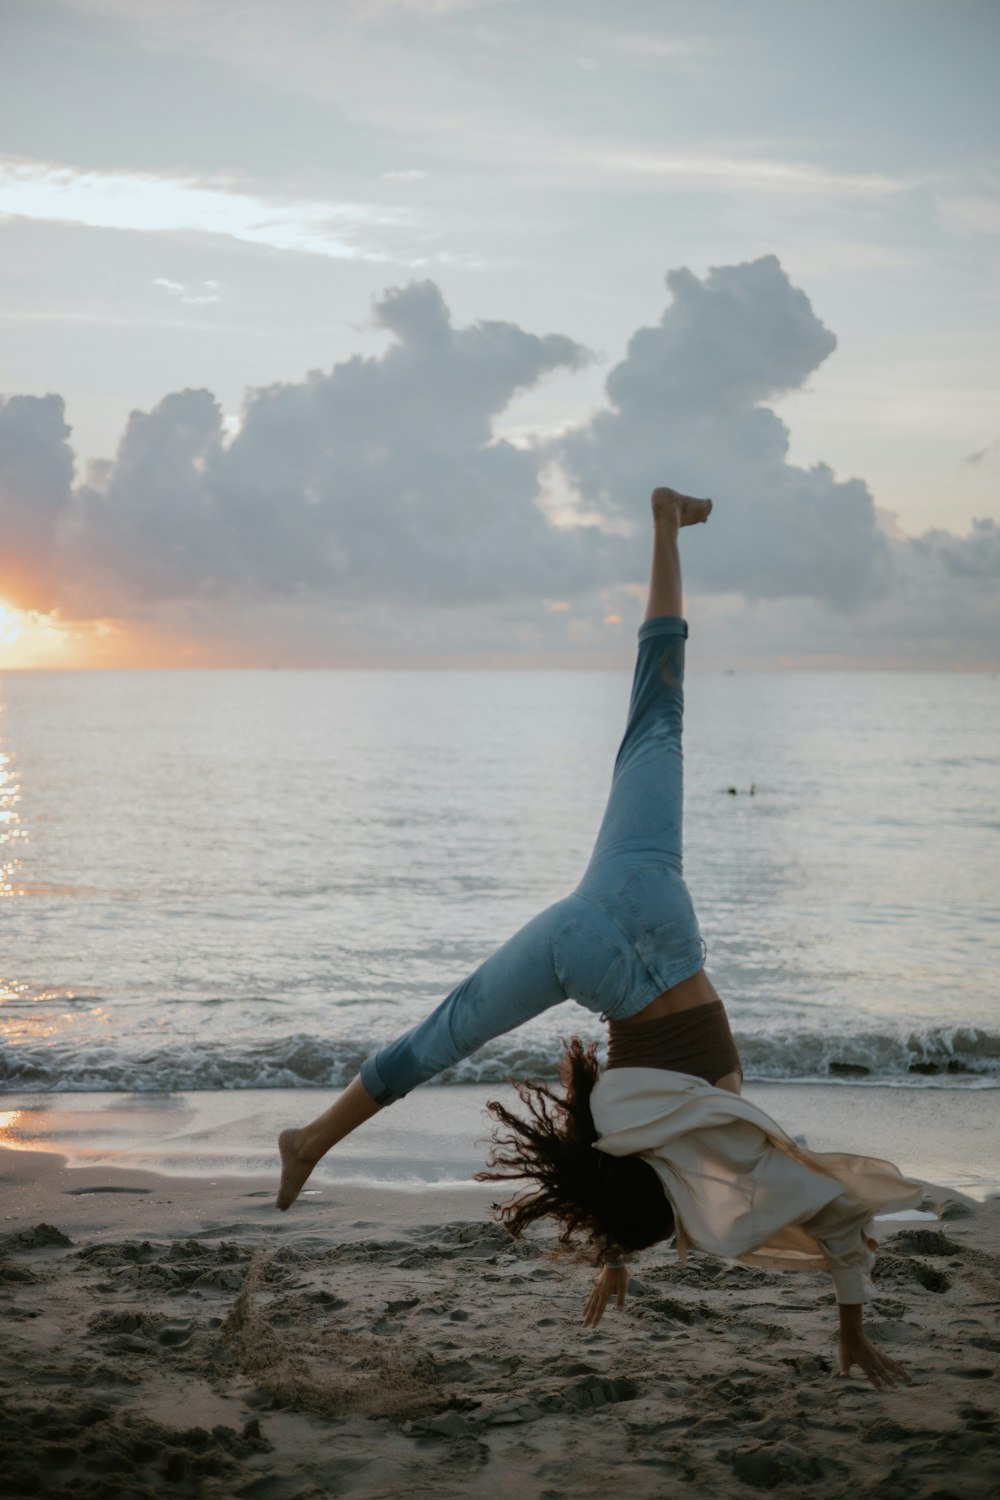 a woman doing a handstand on the beach